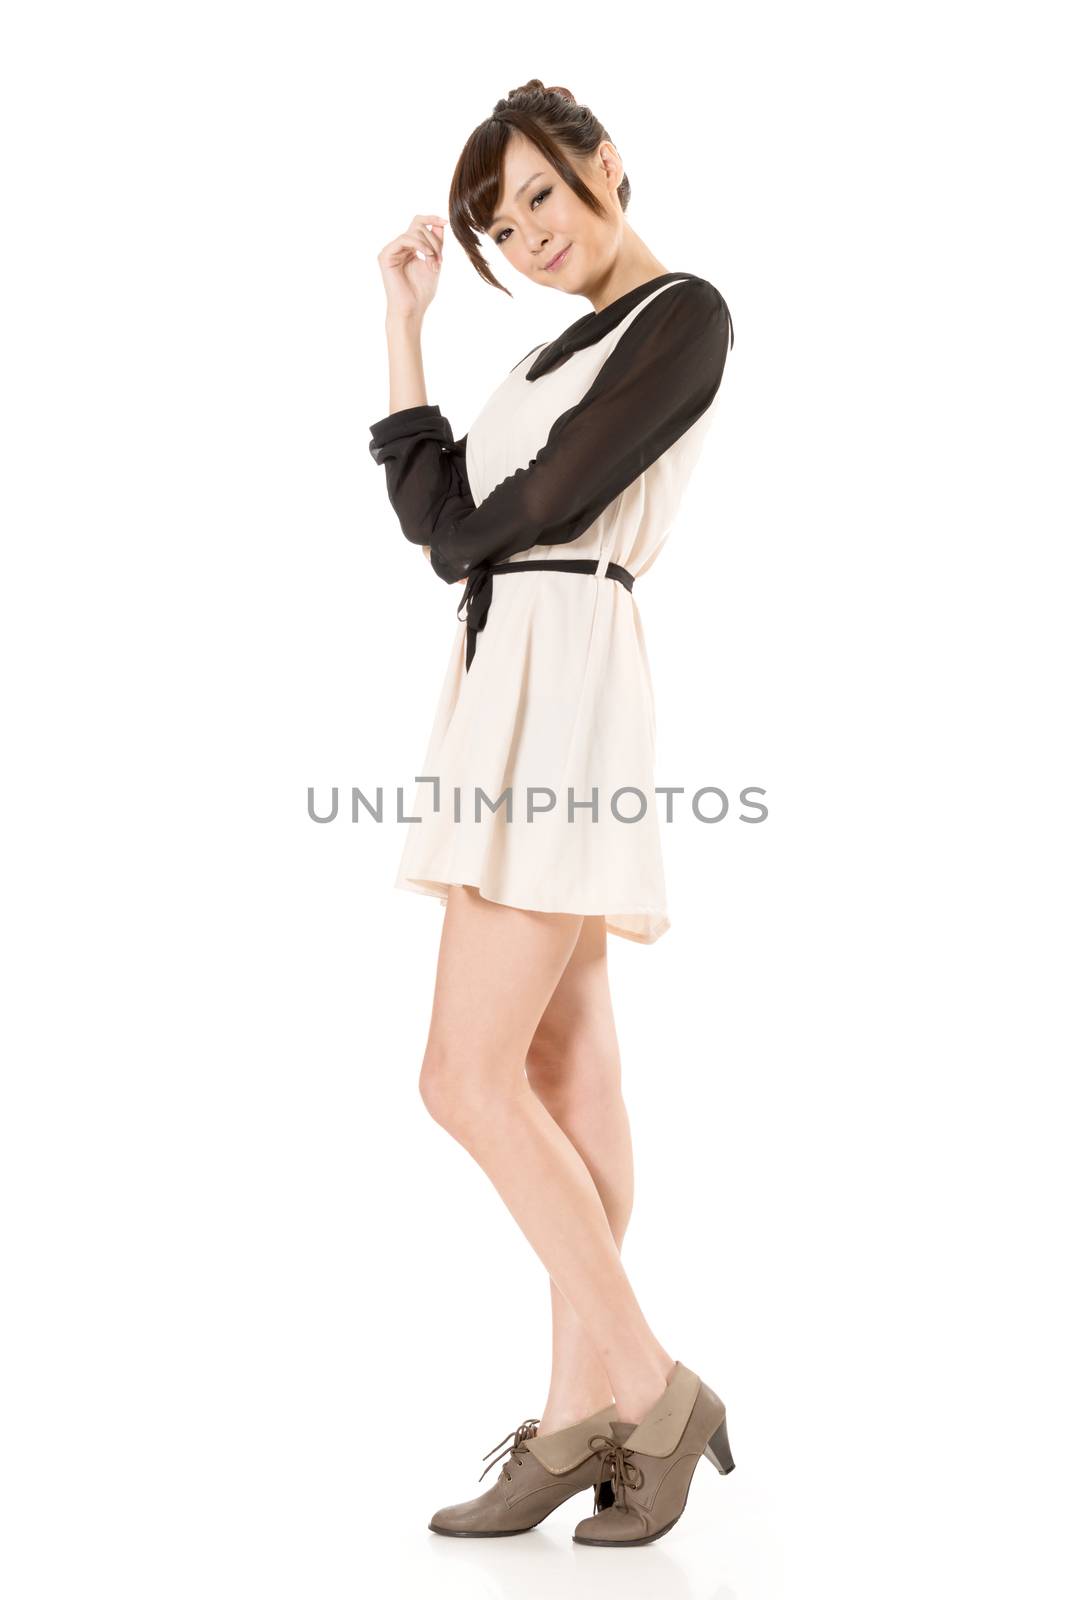 Asian beauty wear a spring dress, full length portrait isolated on white background.